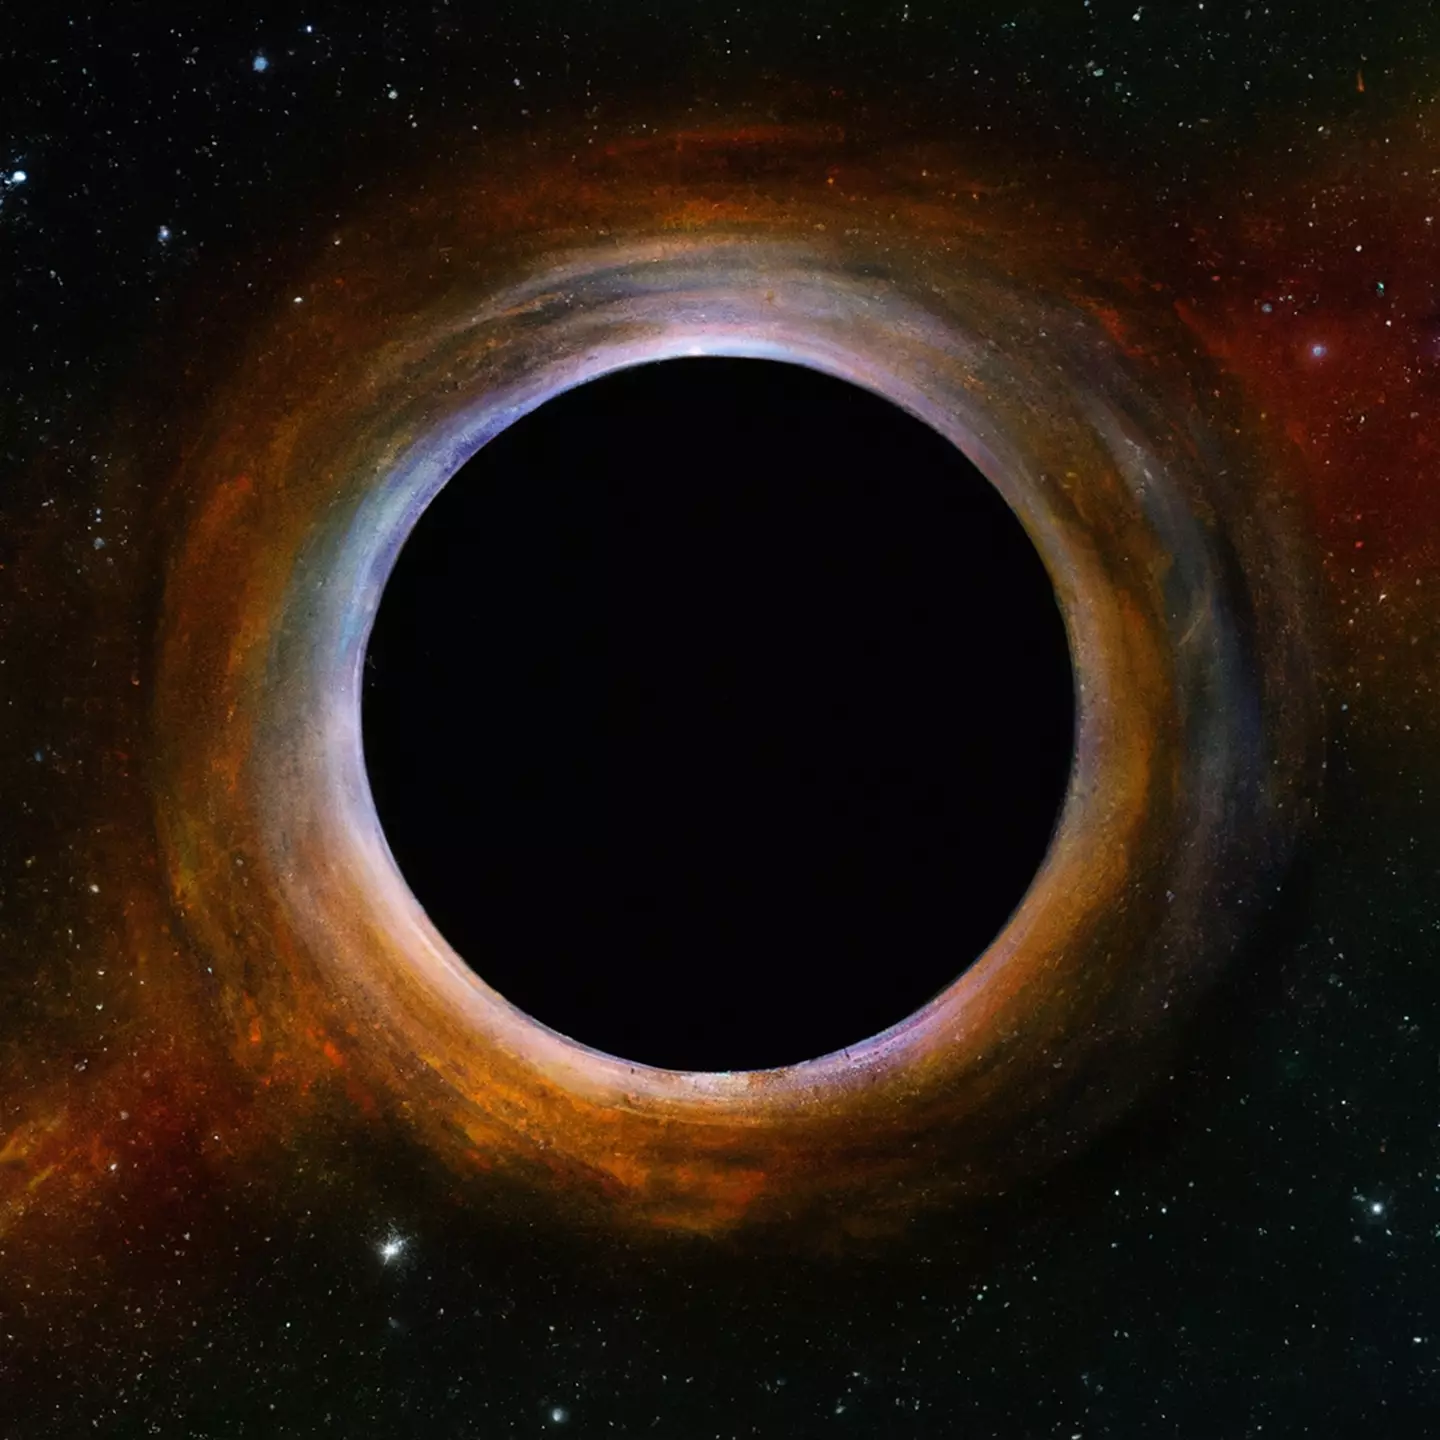 Illustration of a black hole. Image: Getty Stock Images